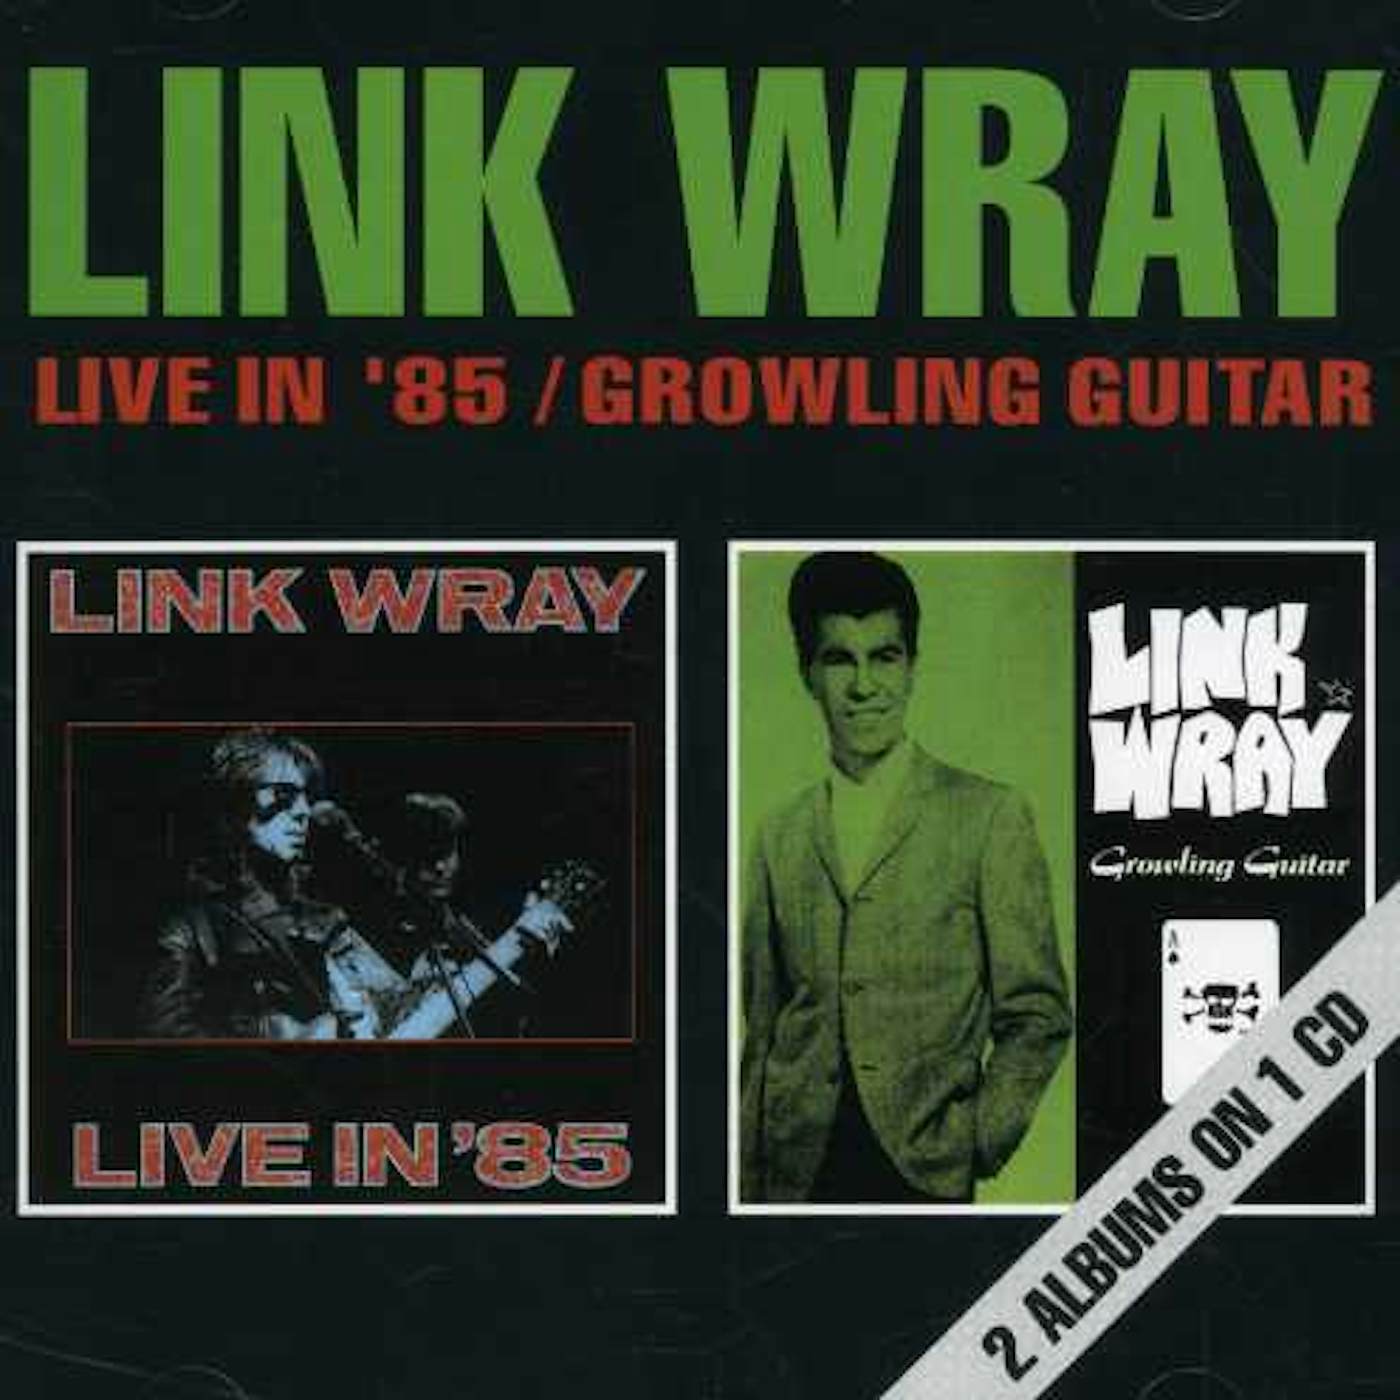 Link Wray LIVE IN '85 / GROWLING GUITAR CD